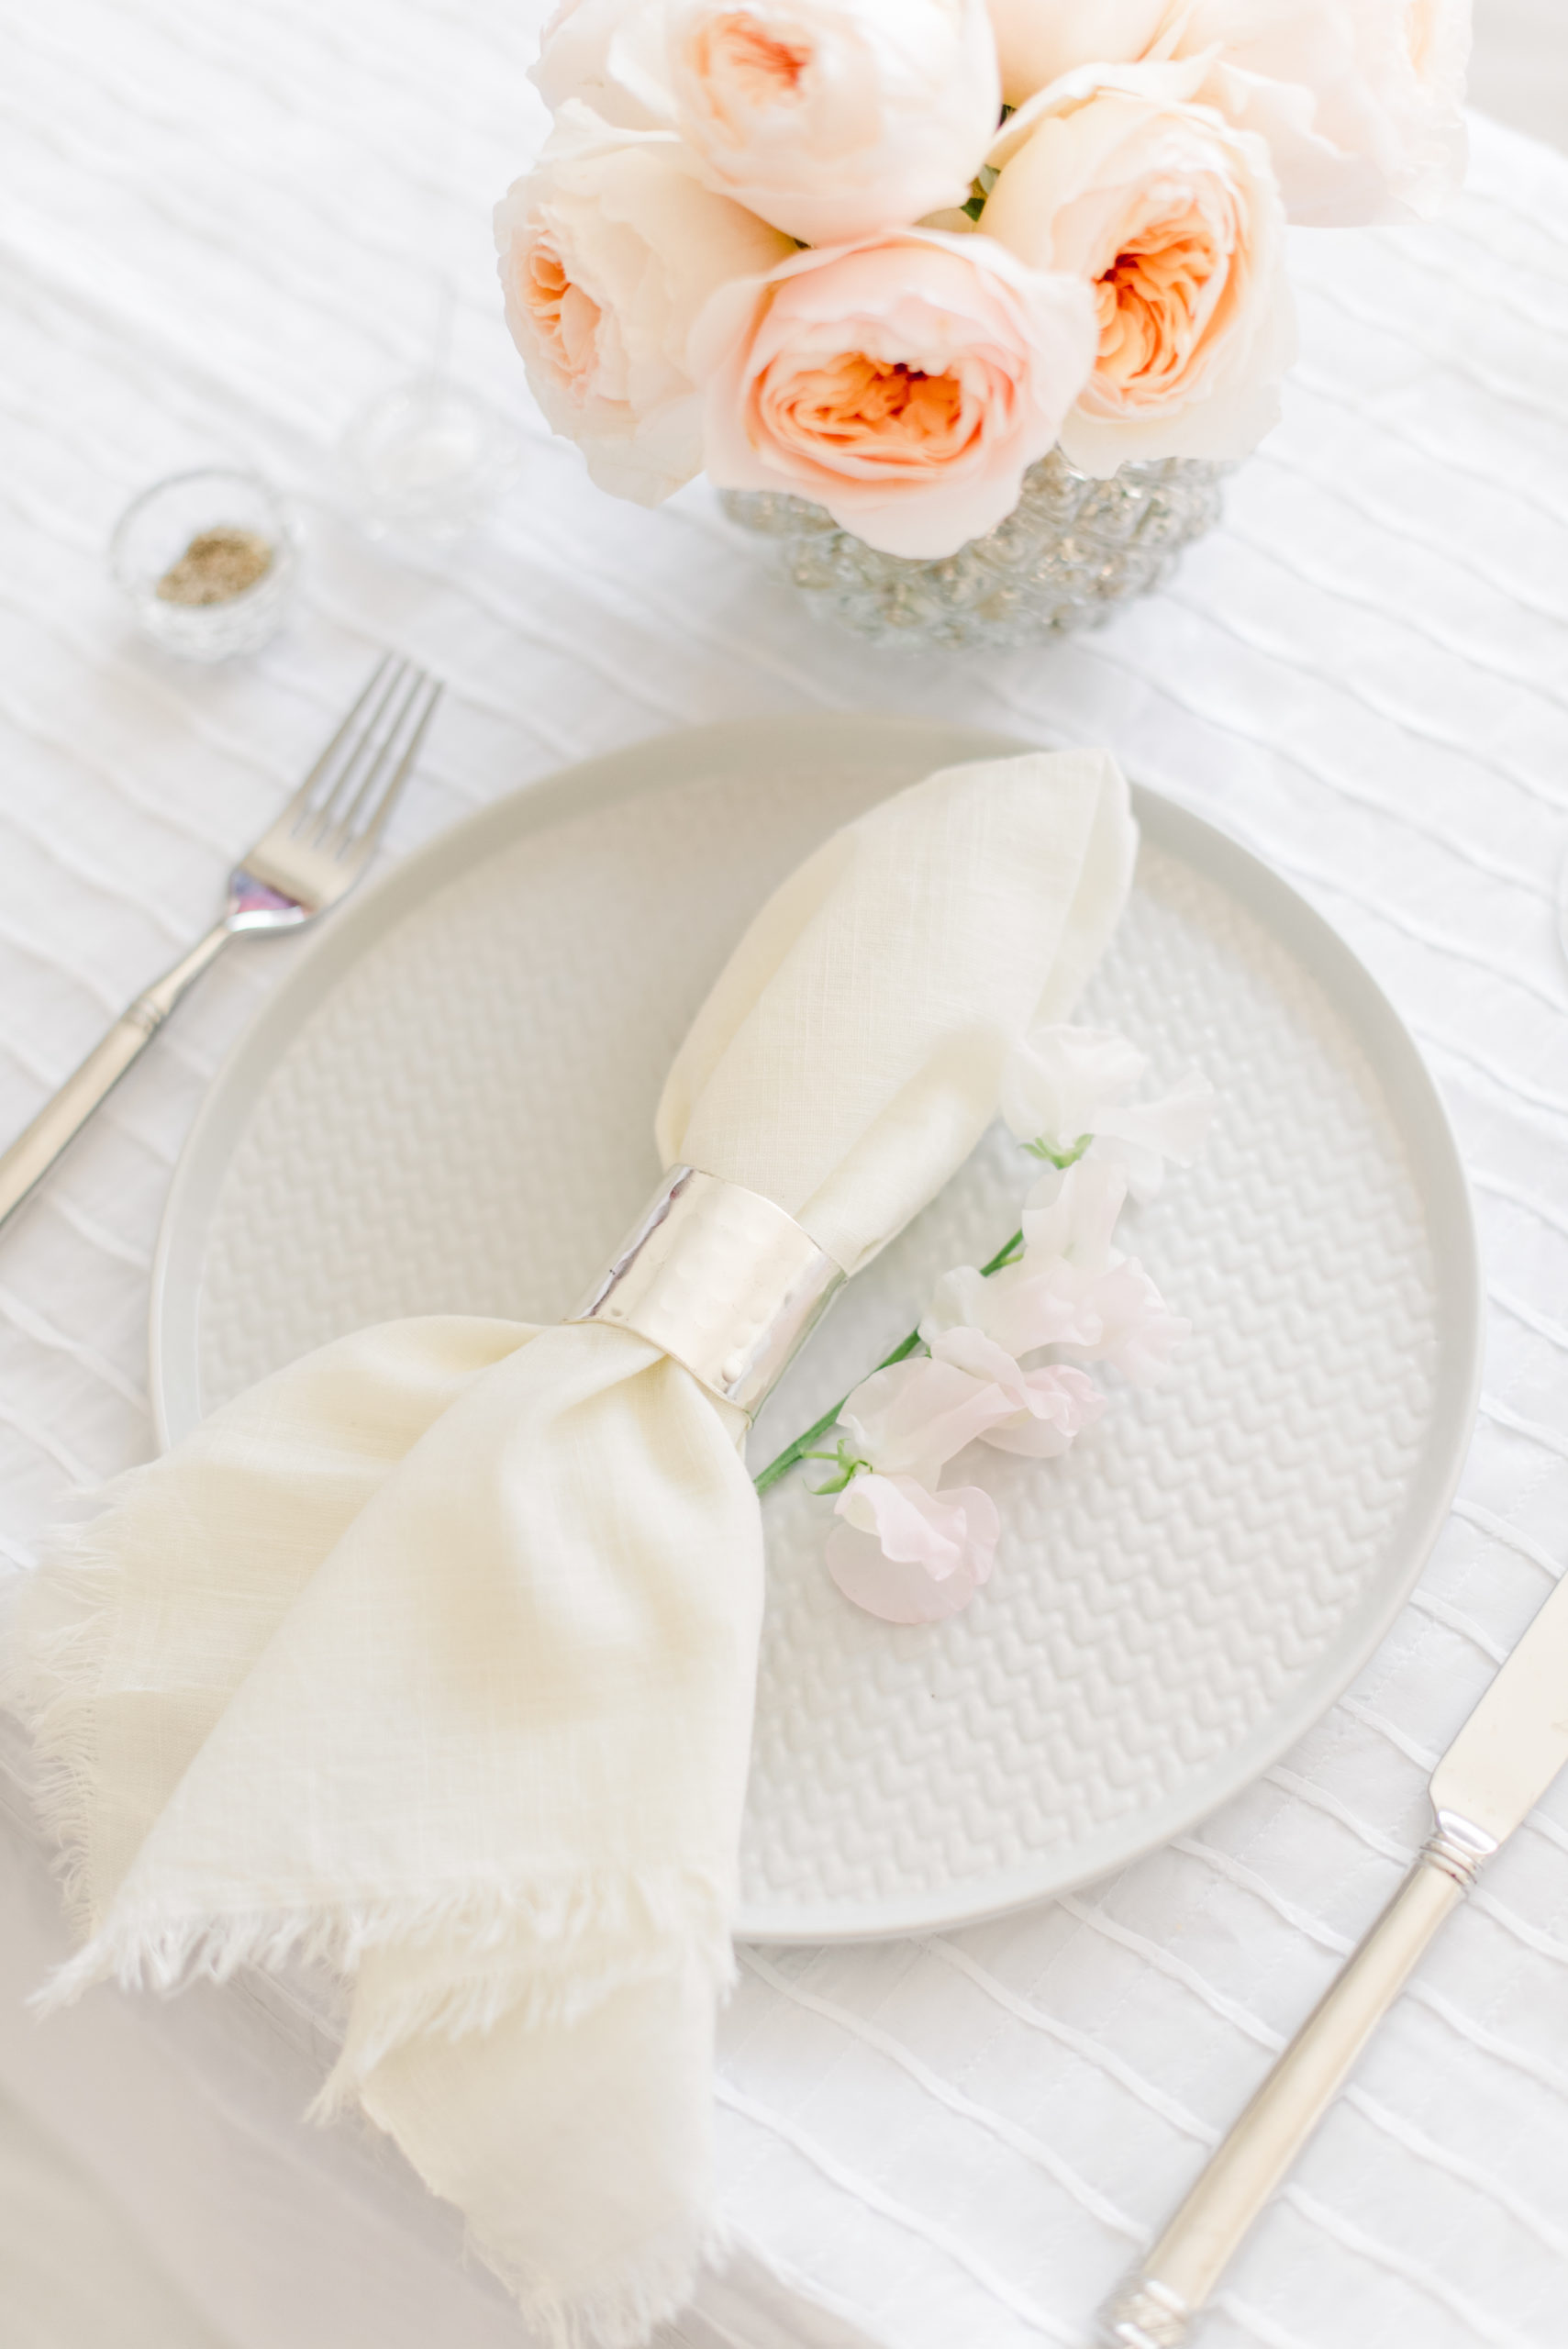 Spruce Up Your Dinner Table with Impressive Napkin Folding